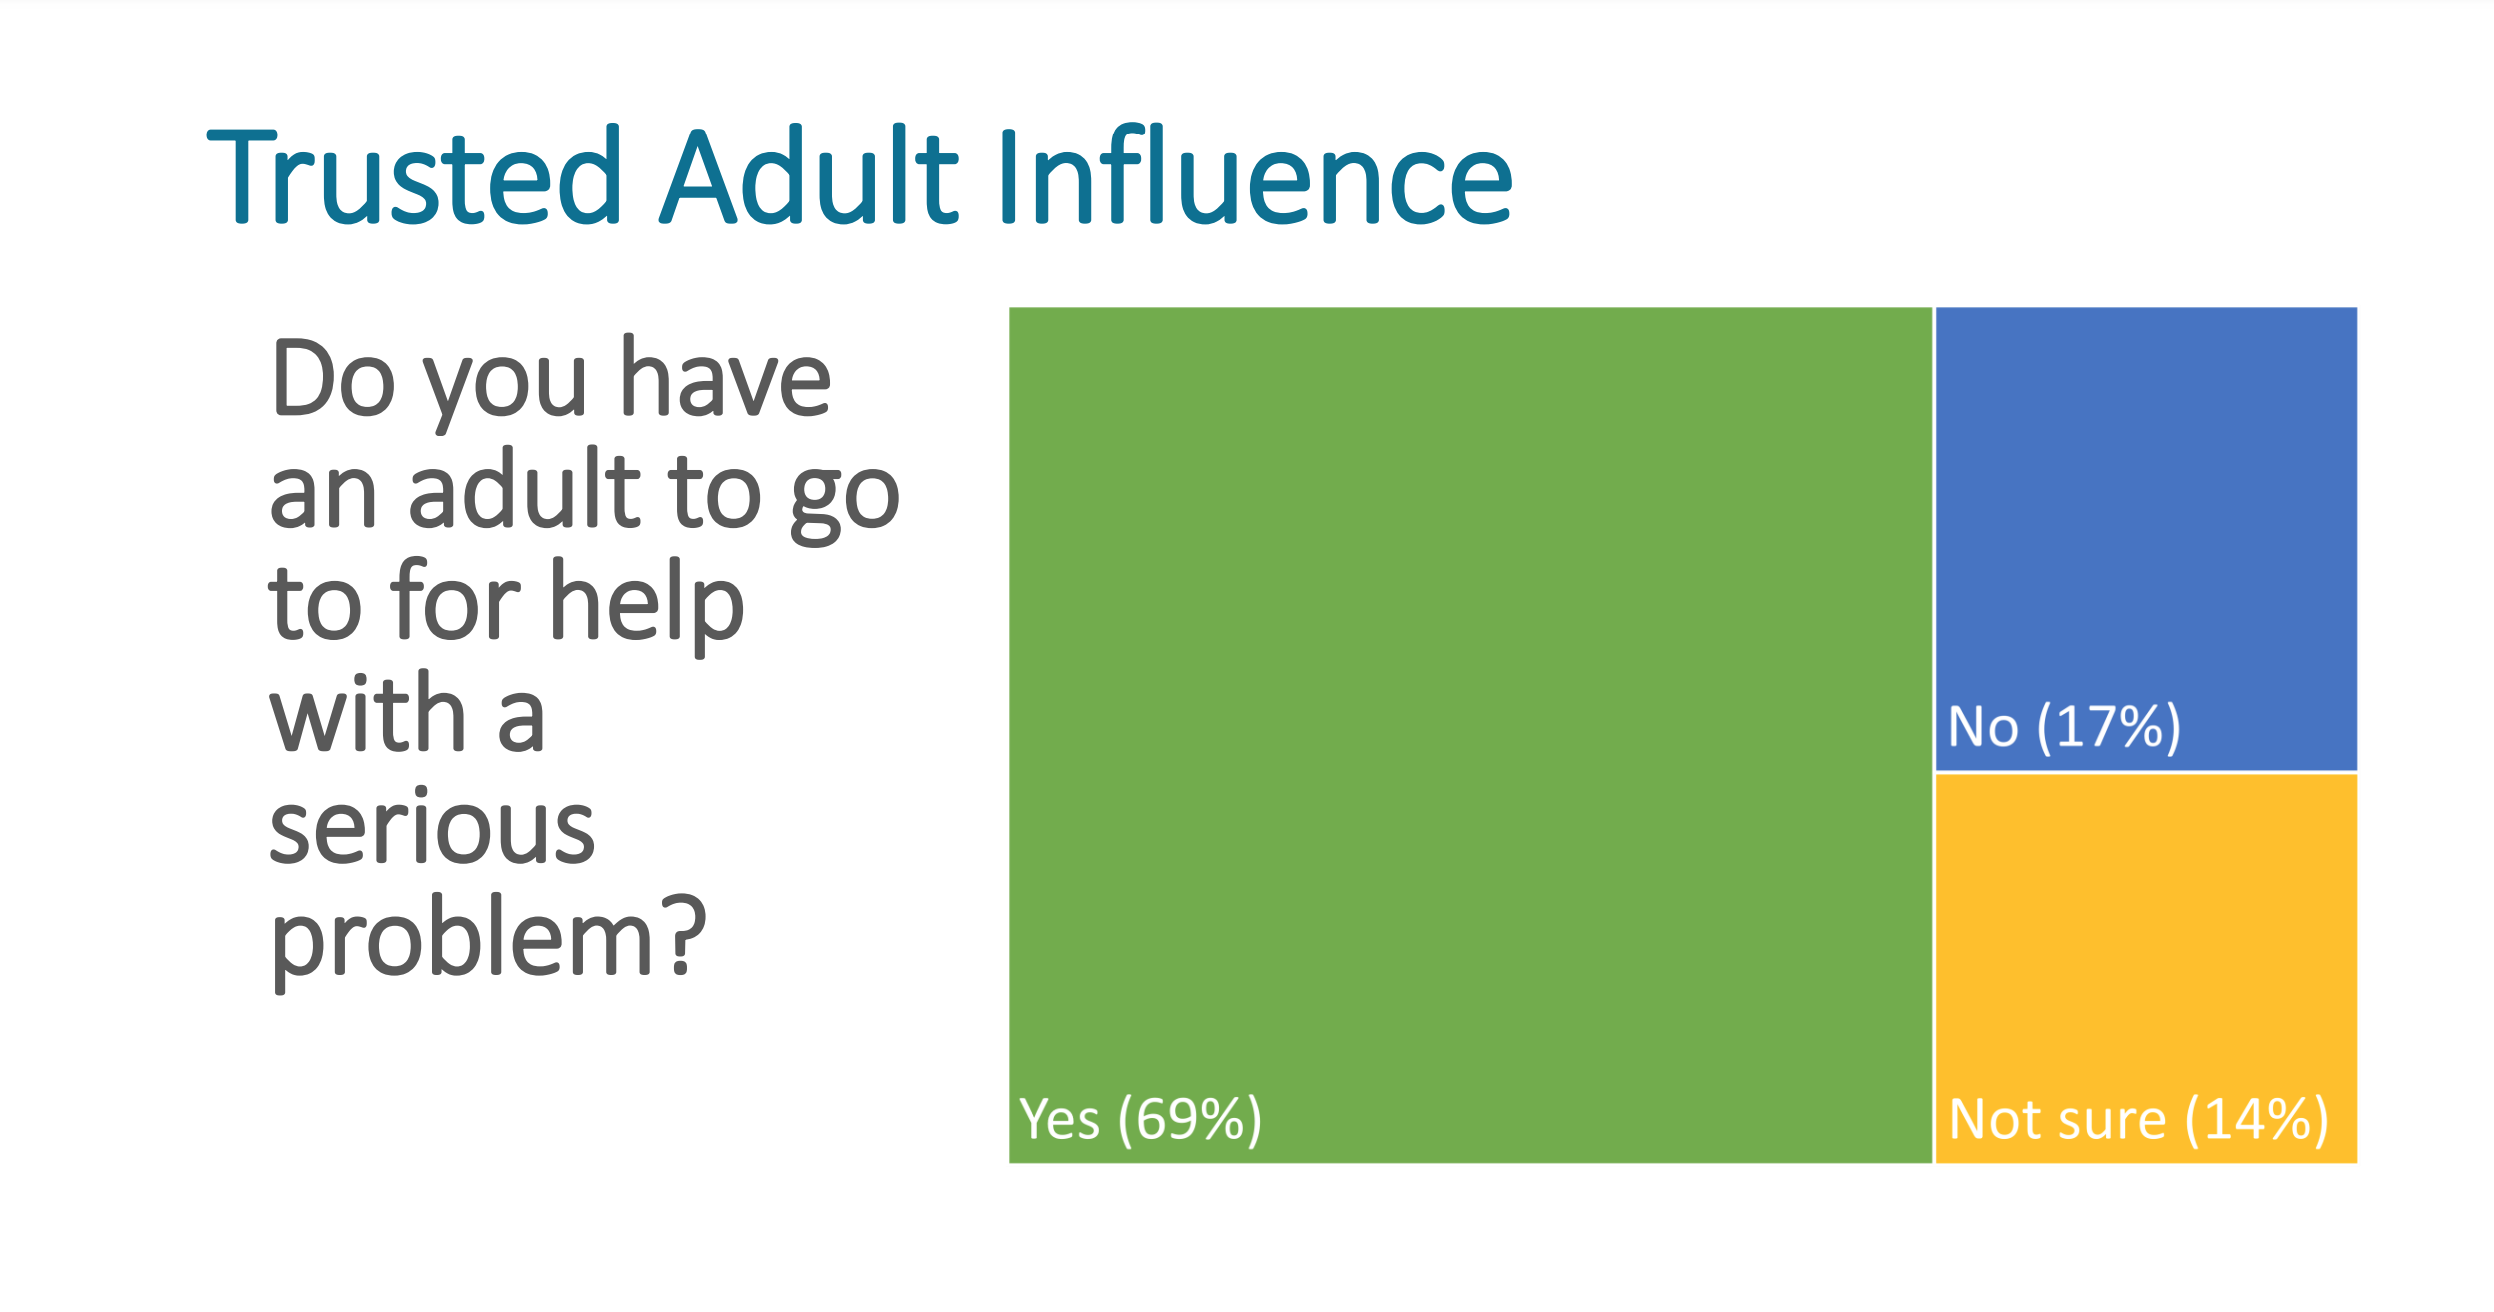 Results of HKCS question 'Do you have an adult to go to for help with a serious problem?' When asked 69% of youth responded 'Yes', 17% 'No', and 14% 'Not sure'